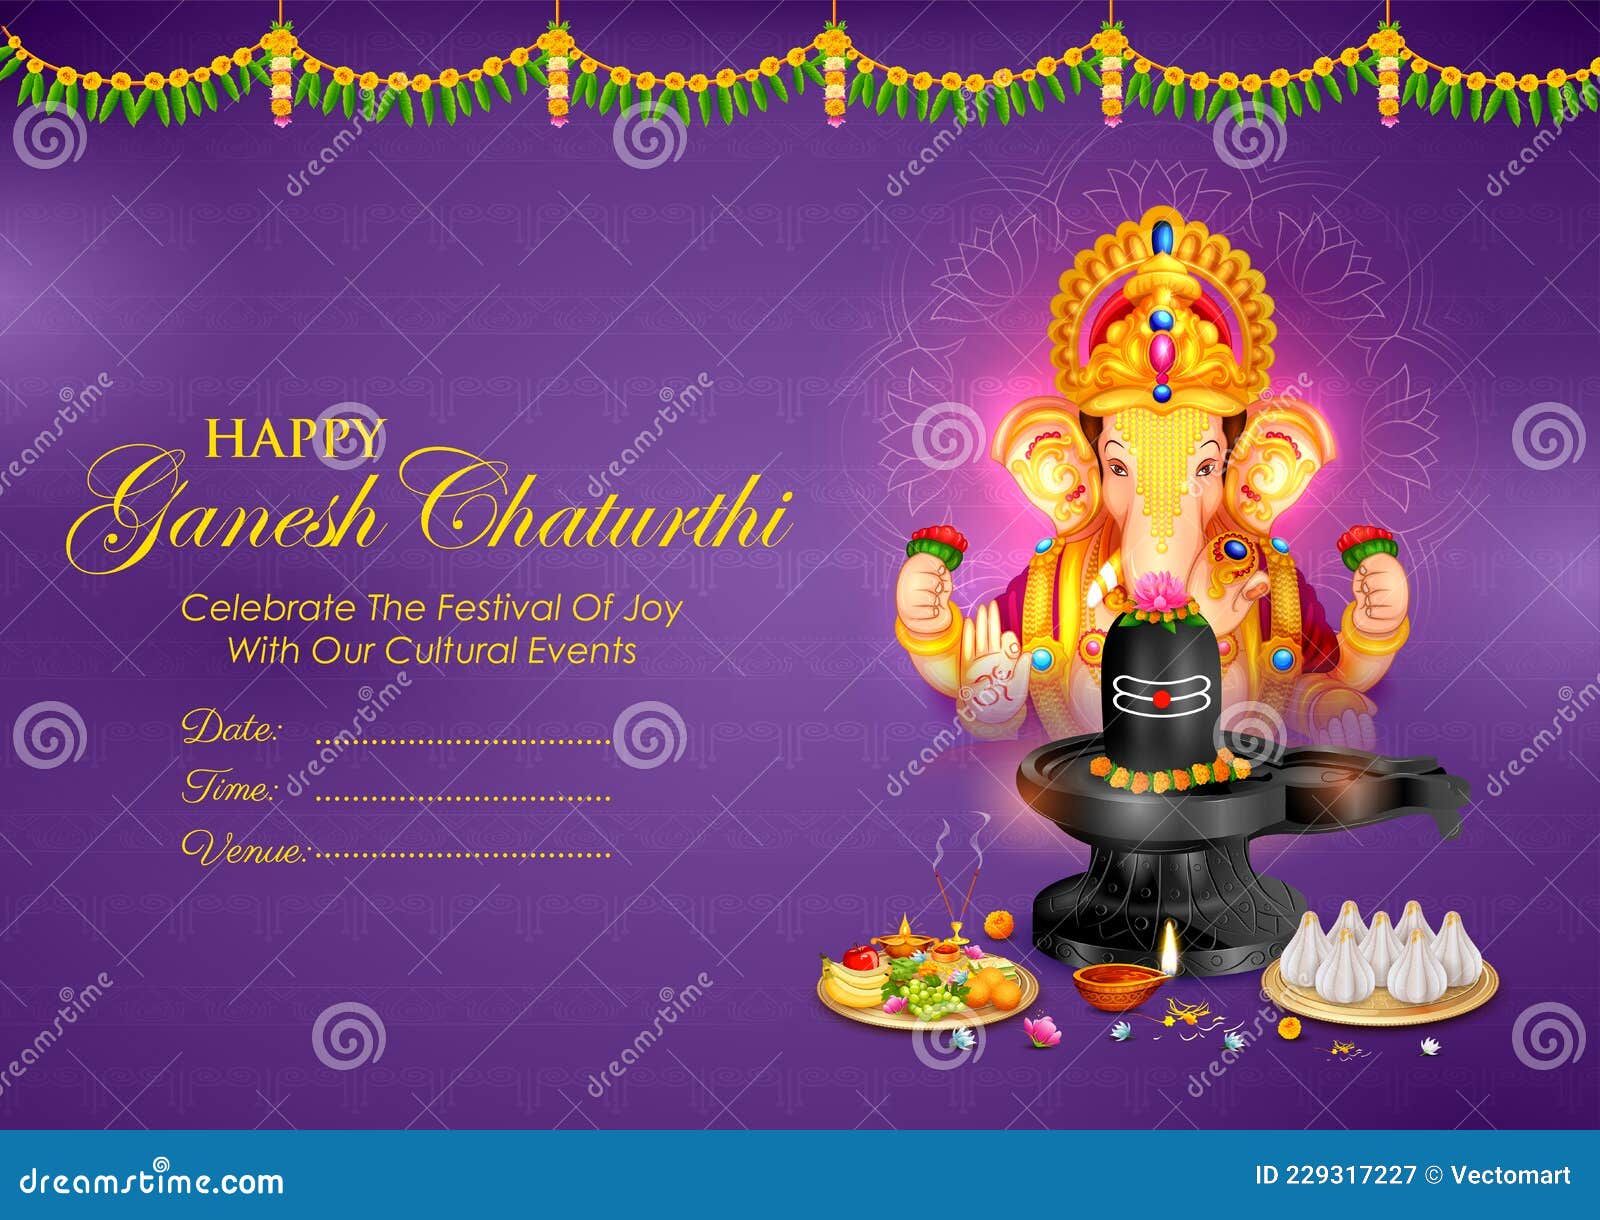 Lord Ganpati Background for Ganesh Chaturthi Festival of India with Message  Meaning My Lord Ganesha Stock Vector - Illustration of elephant, festival:  229317227